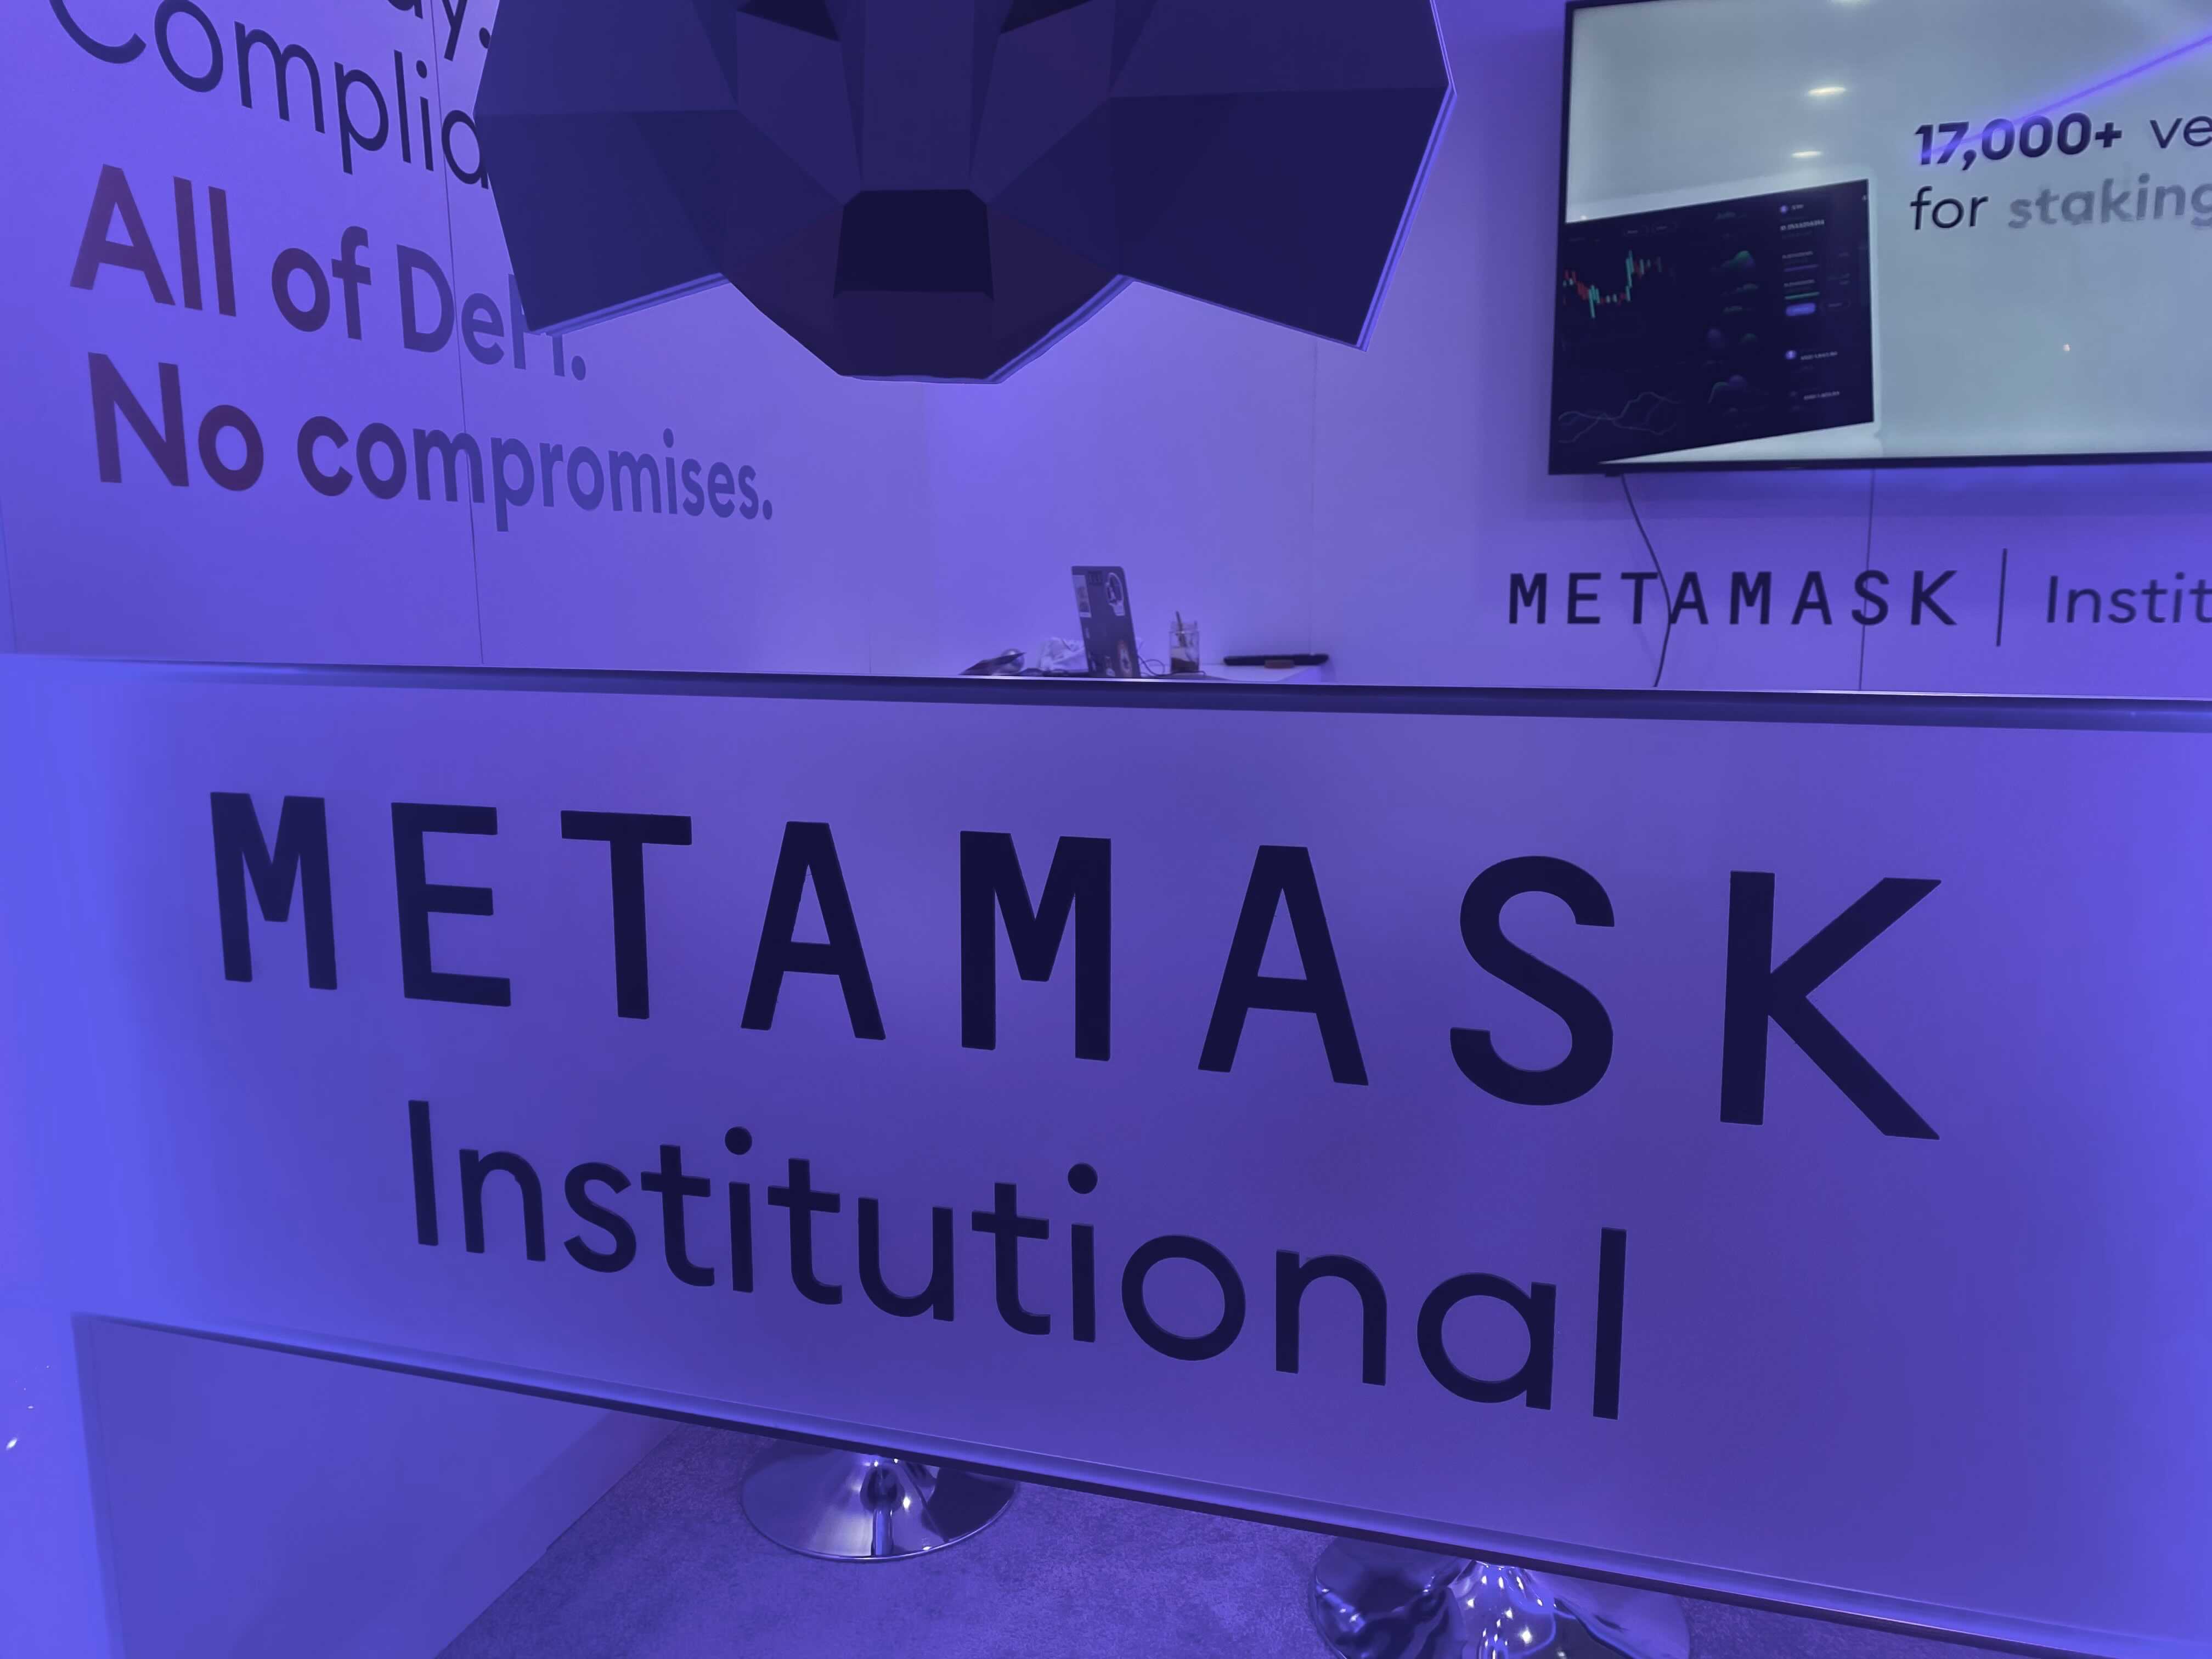 MetaMask’s Institutional Arm Makes Push for DAOs With New Custody Deals